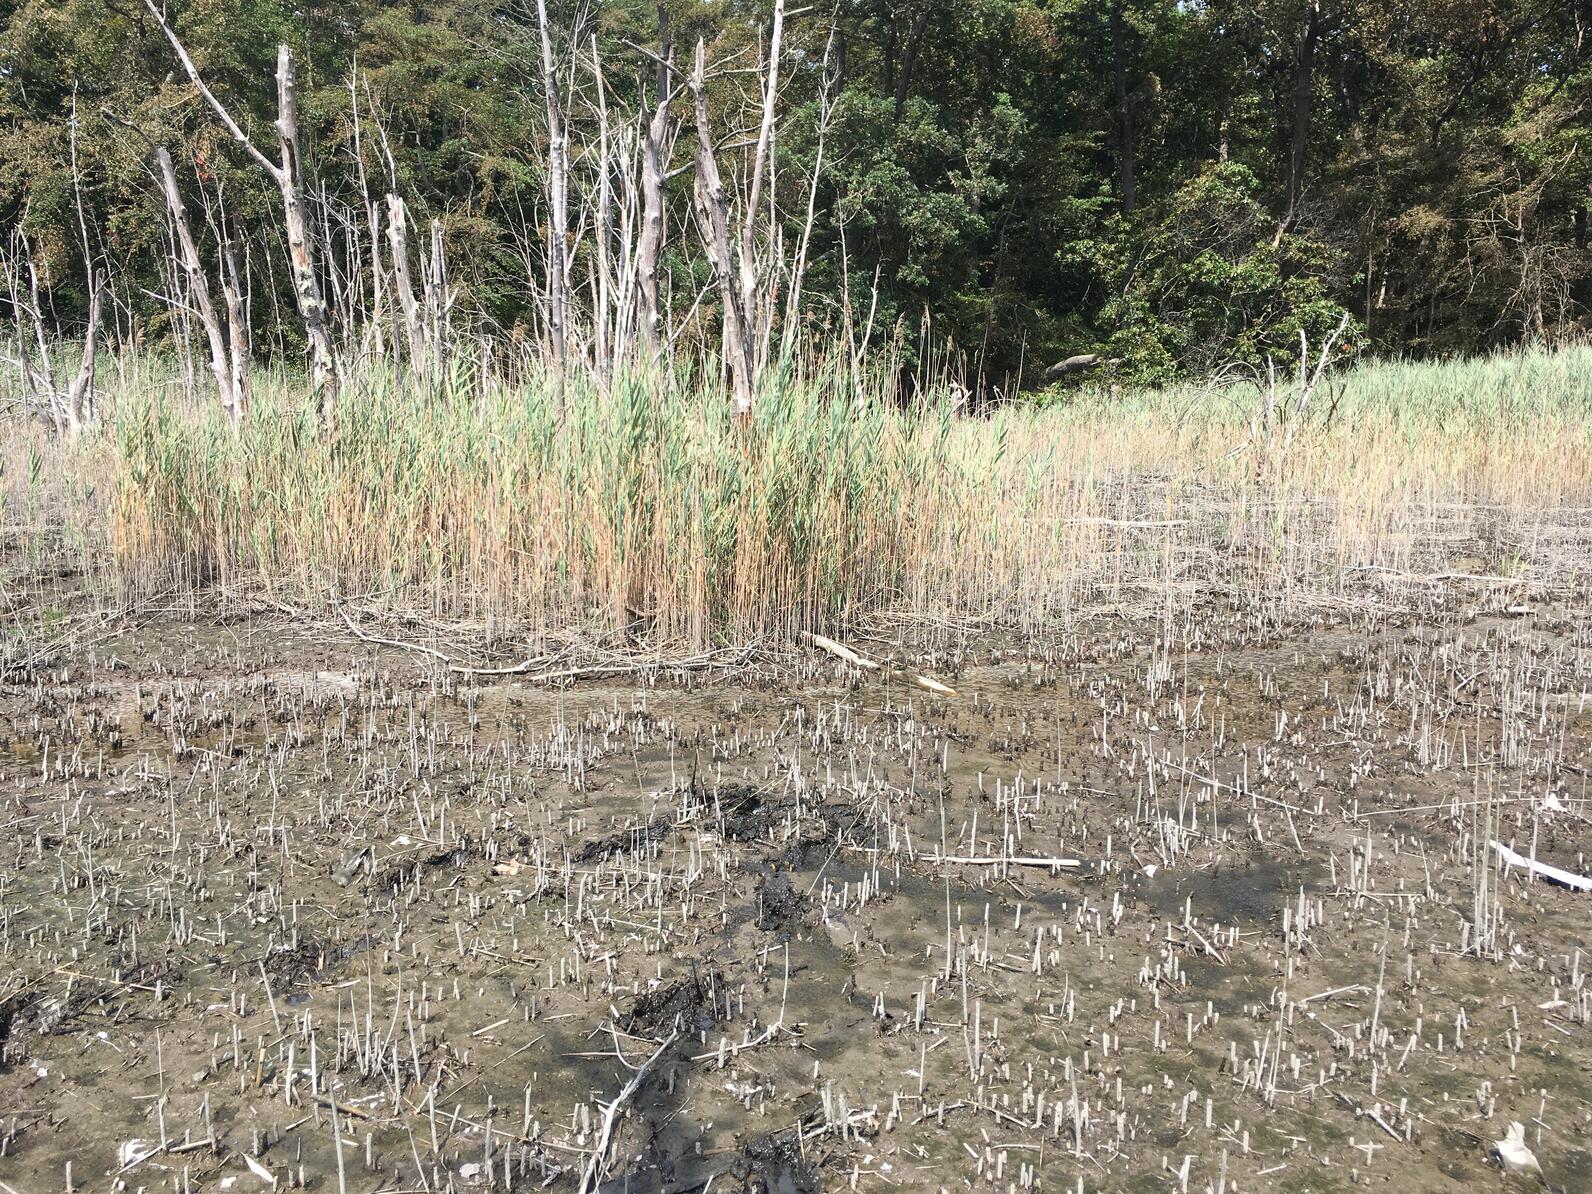 Degraded marsh with invasive Phragmites australis at Sunken Meadow State Park, NY.